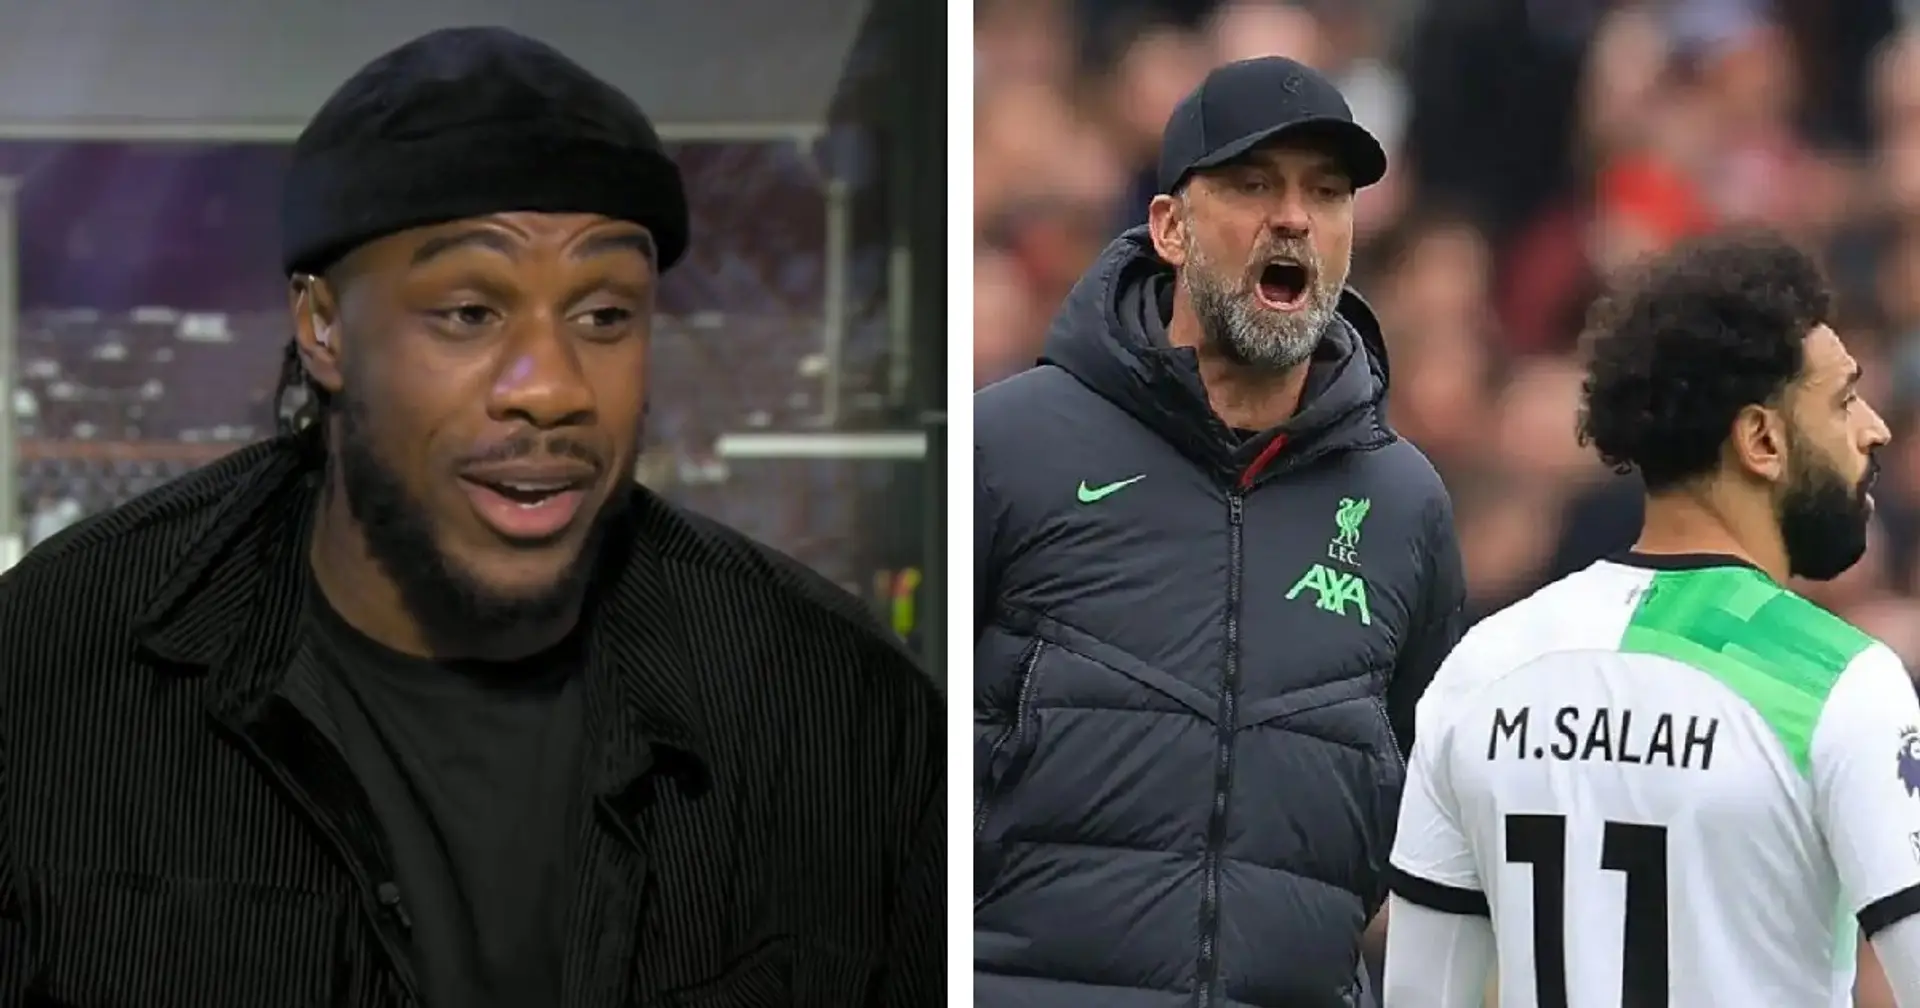 'Klopp didn't like that': Michail Antonio shares what he's heard about the Salah touchline incident with Jurgen